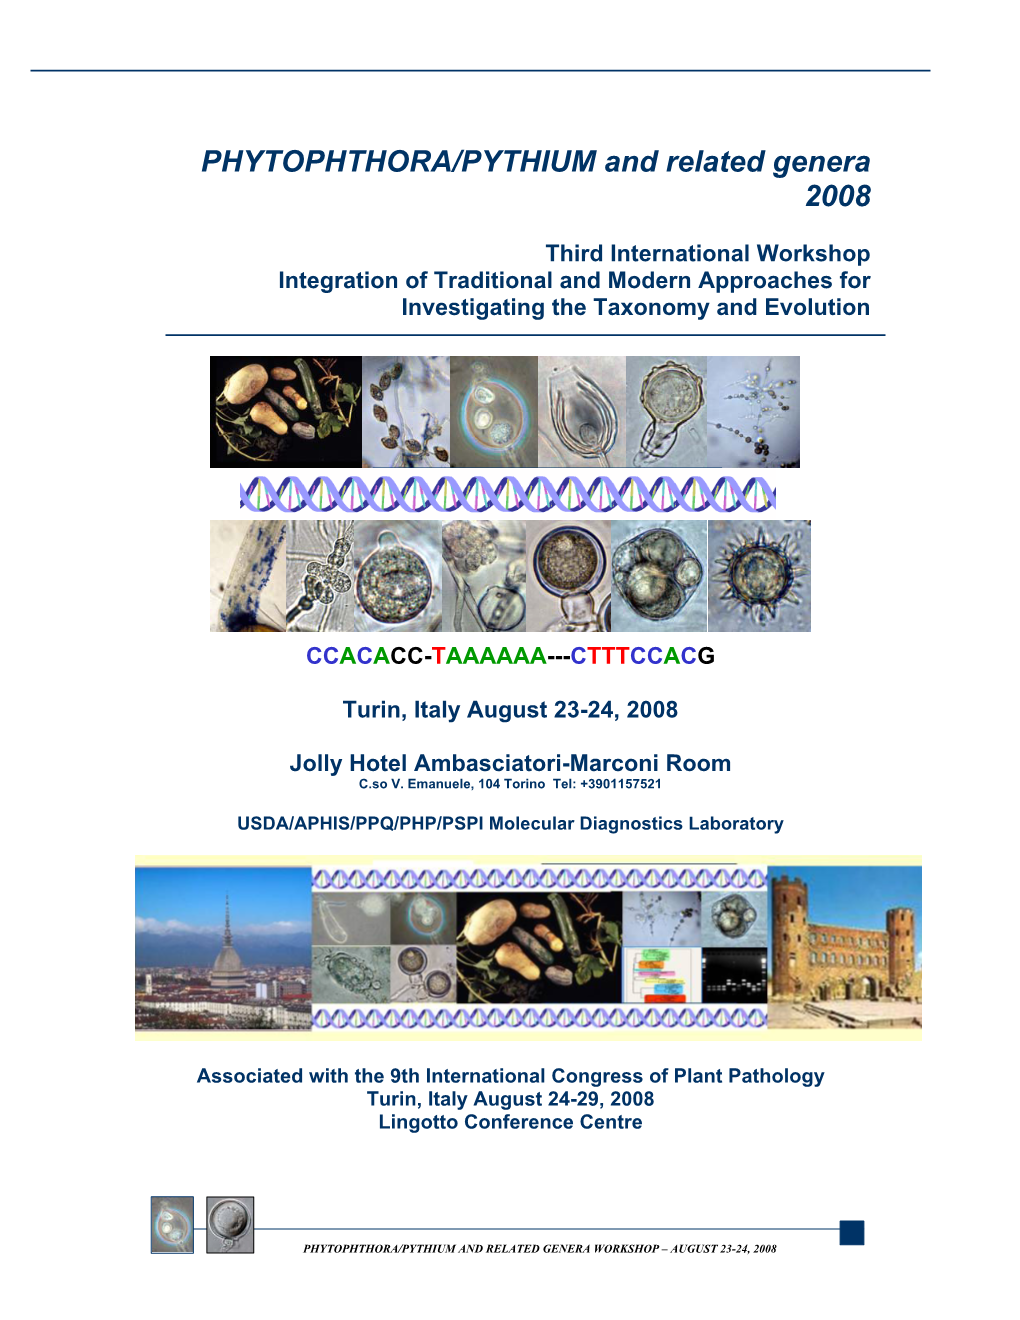 PHYTOPHTHORA/PYTHIUM and Related Genera 2008